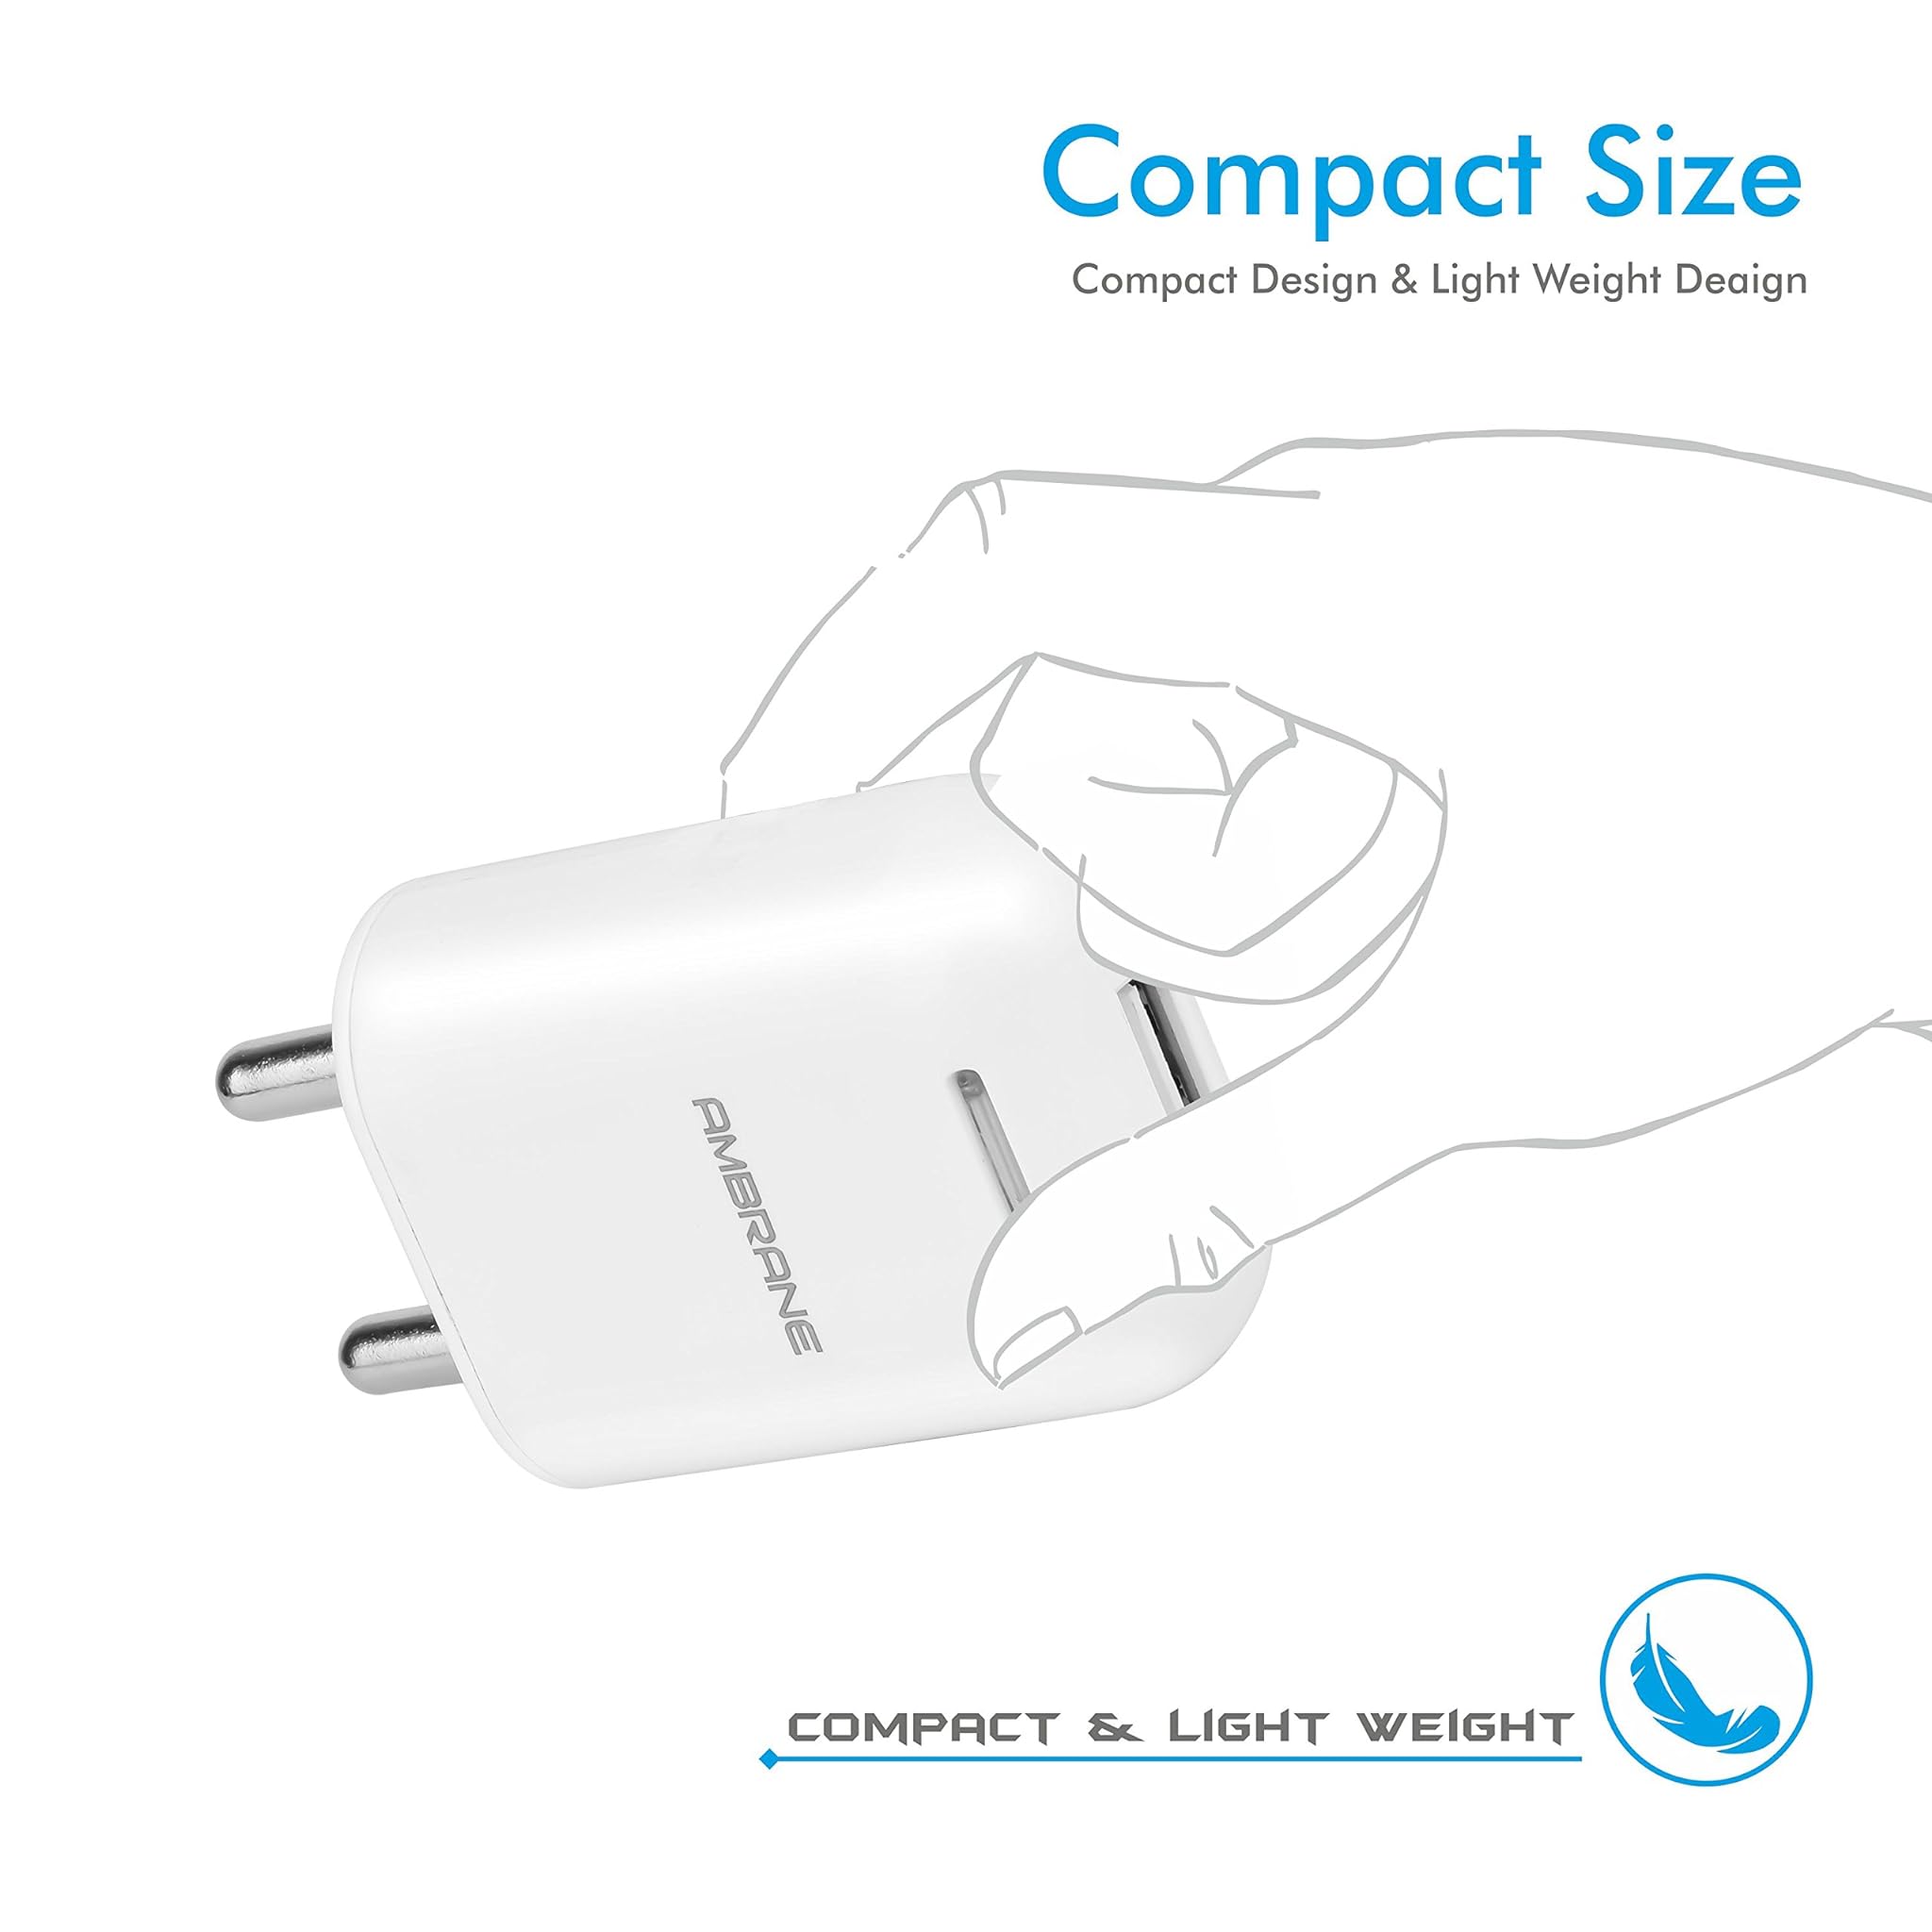 Ambrane Wall charger 10.5W W/o Cable, 5V/2.1A - AWC-38 w/o Cable